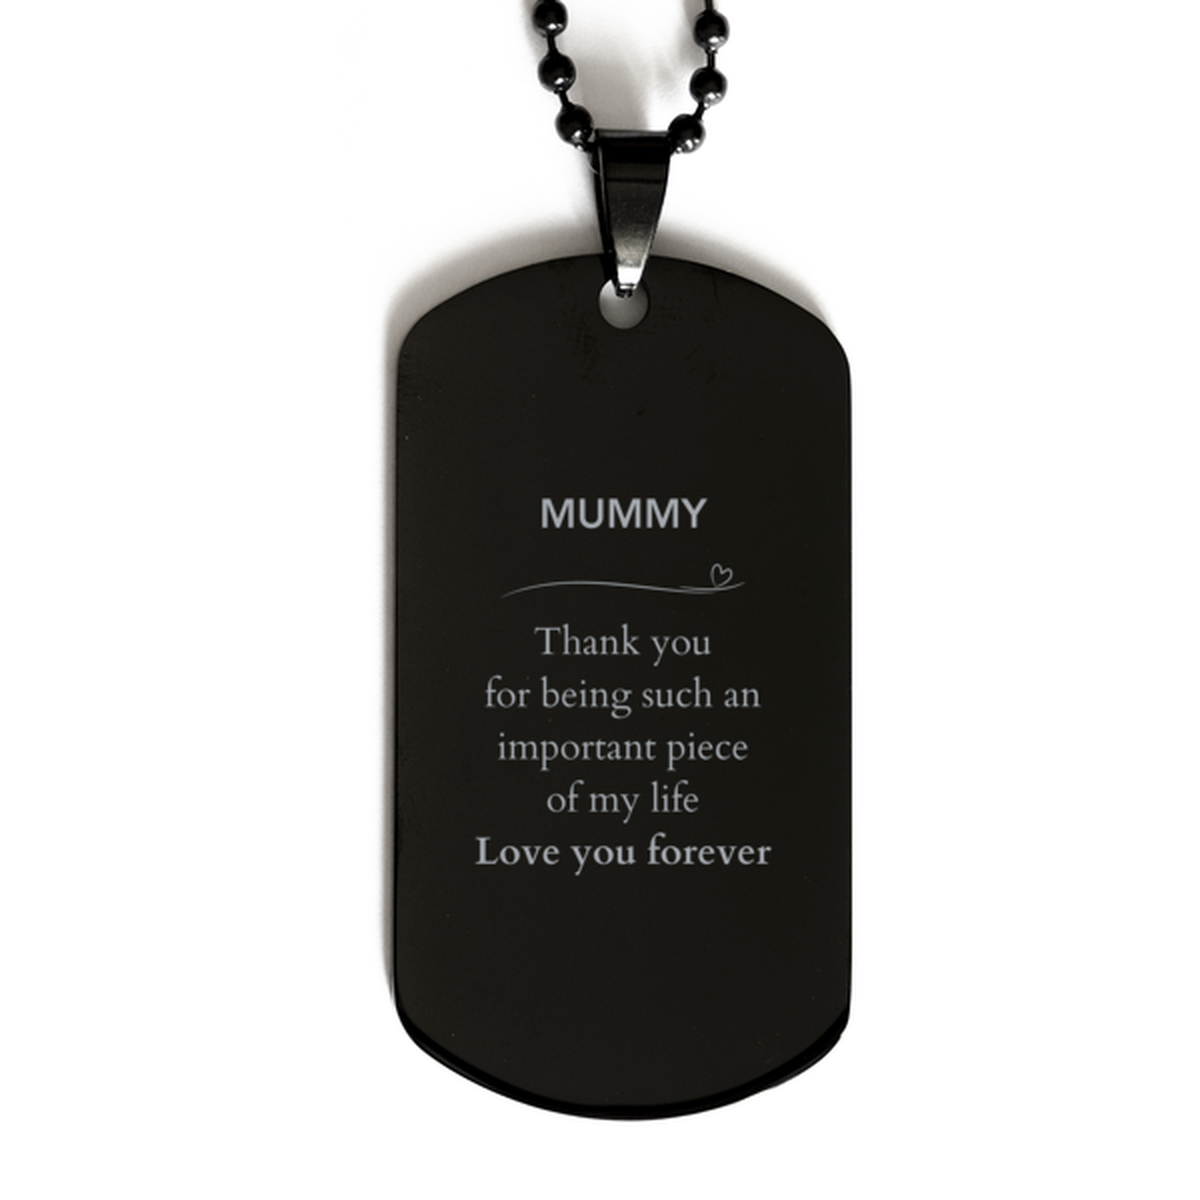 Appropriate Mummy Black Dog Tag Epic Birthday Gifts for Mummy Thank you for being such an important piece of my life Mummy Christmas Mothers Fathers Day